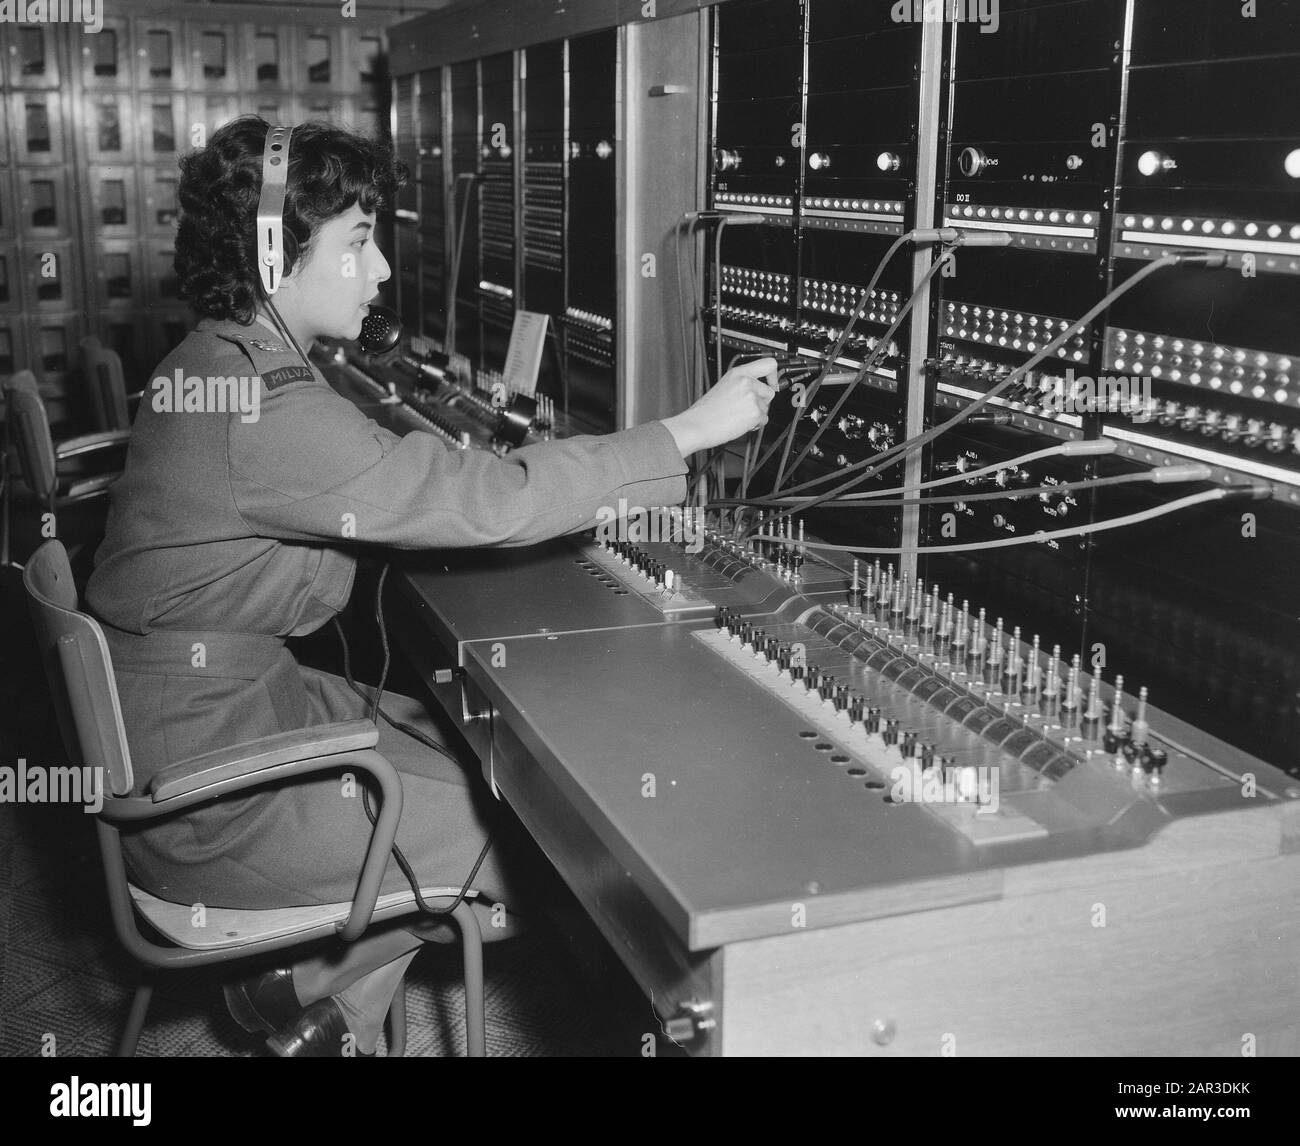 Reportage Reserve Milva  Reserve Milva Annotation: Telephonist at switchboard Date: 7 January 1957 Stock Photo